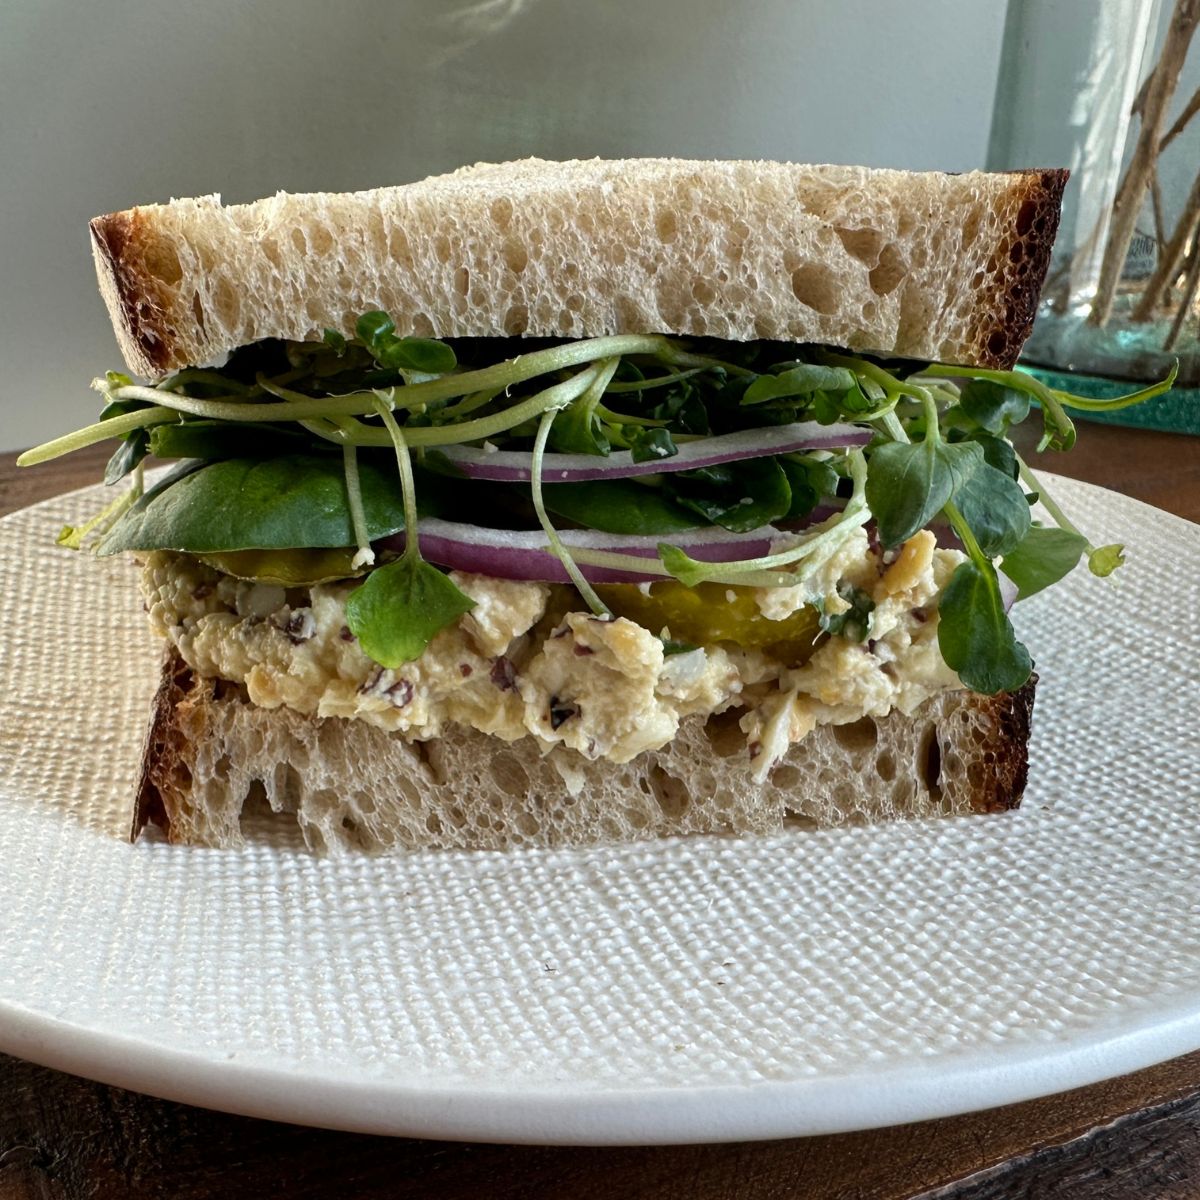 Vegan tuna salad sandwich on a plate with greens and wheat bread.